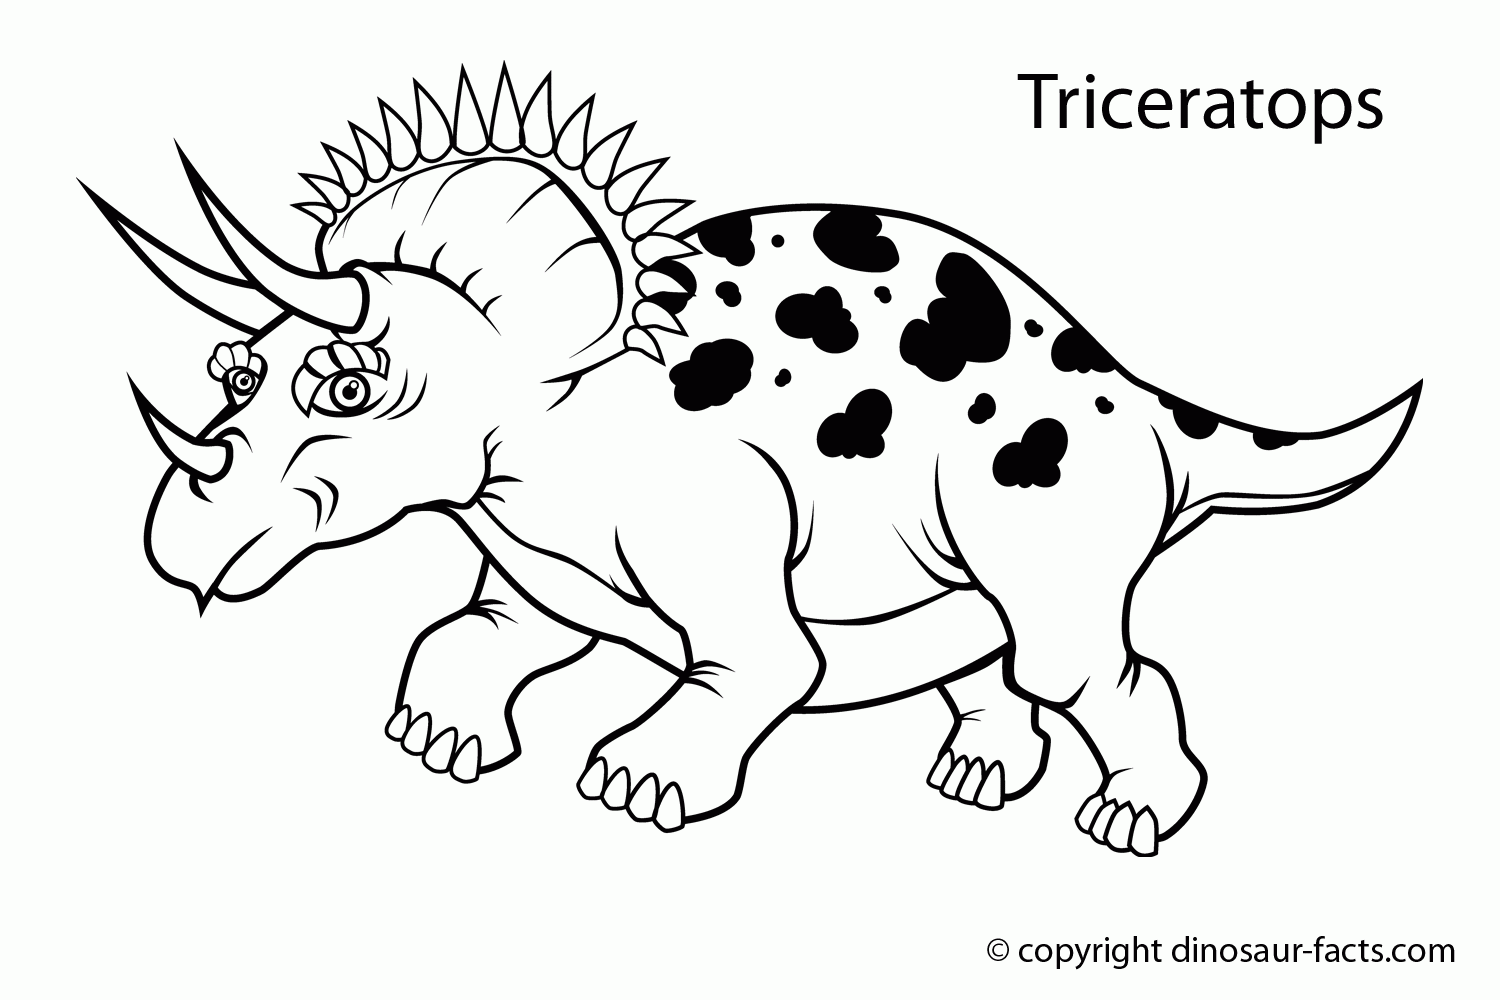 Dinosaurs For Kids   Coloring Pages For Kids And For Adults ...